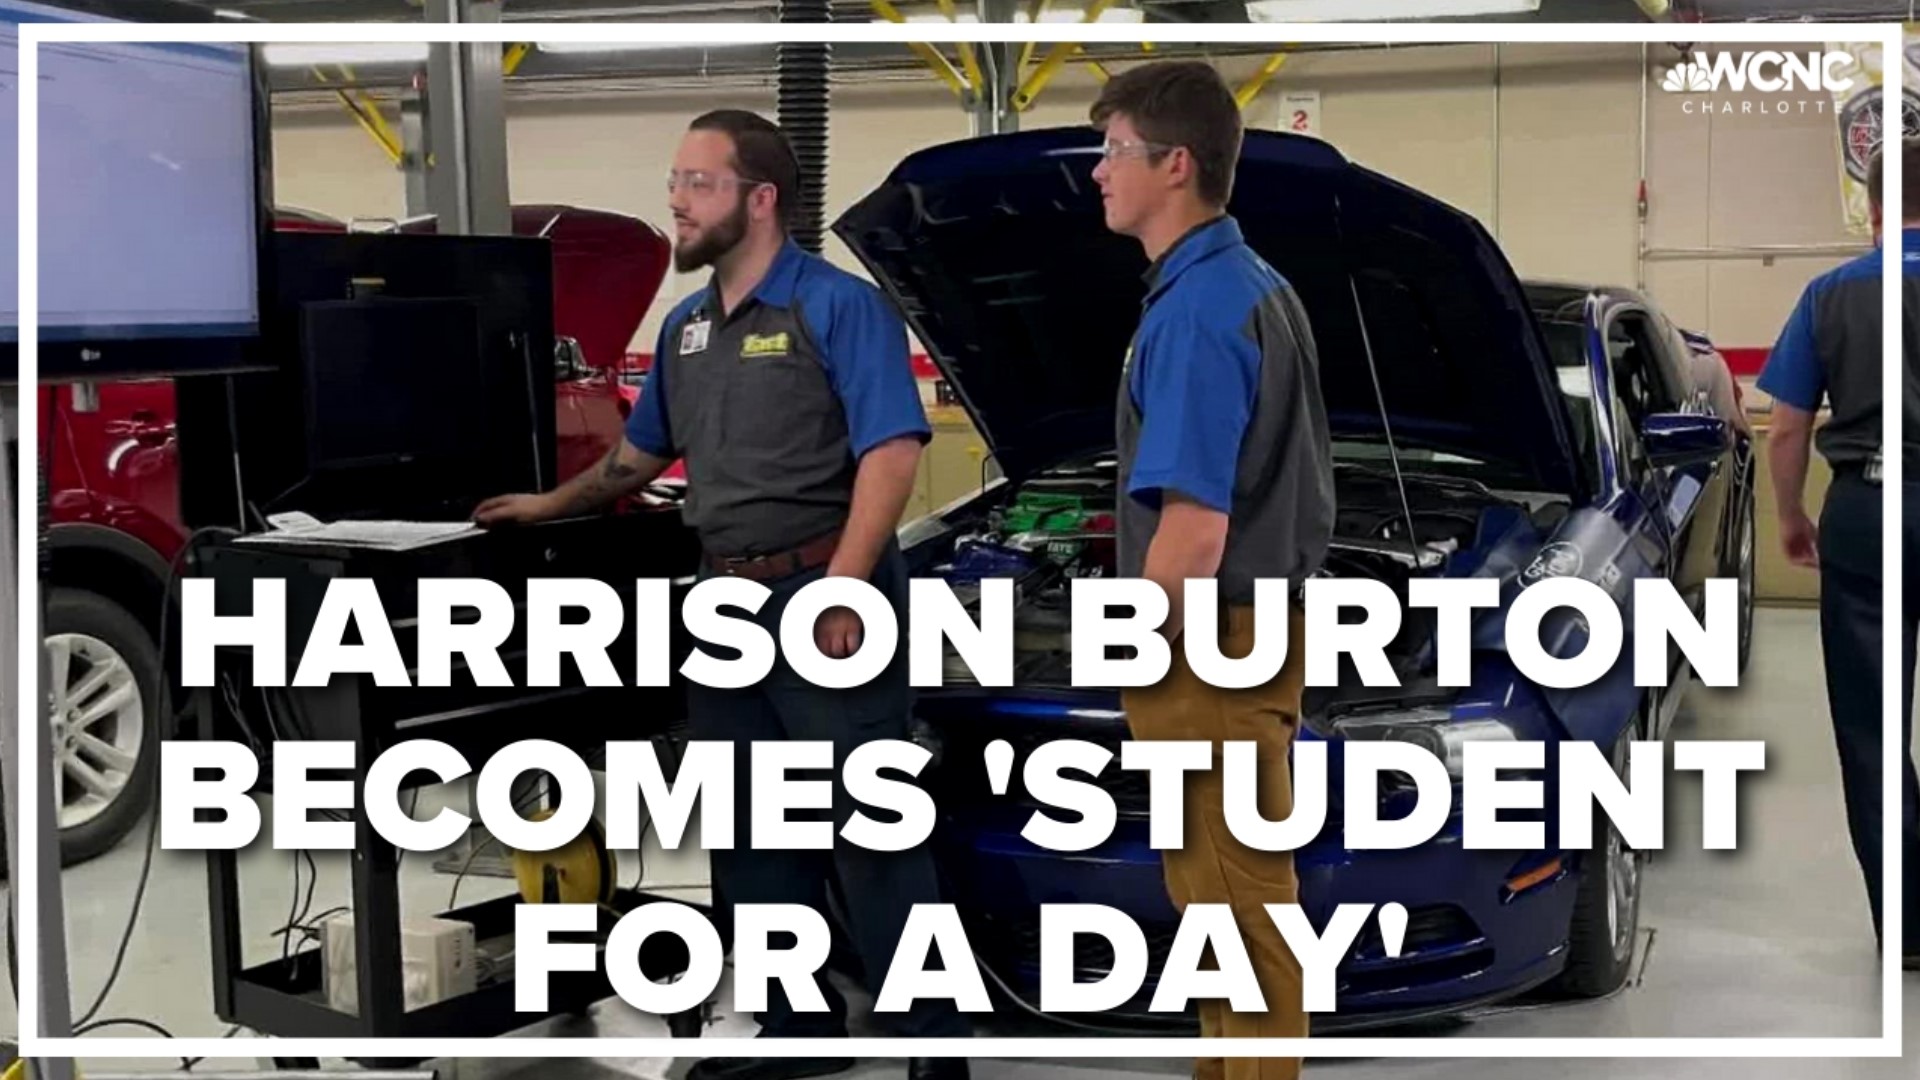 Wednesday morning, NASCAR Cup Series driver Harrison Burton became a student for a day, learning about the school's Ford FACT Program.